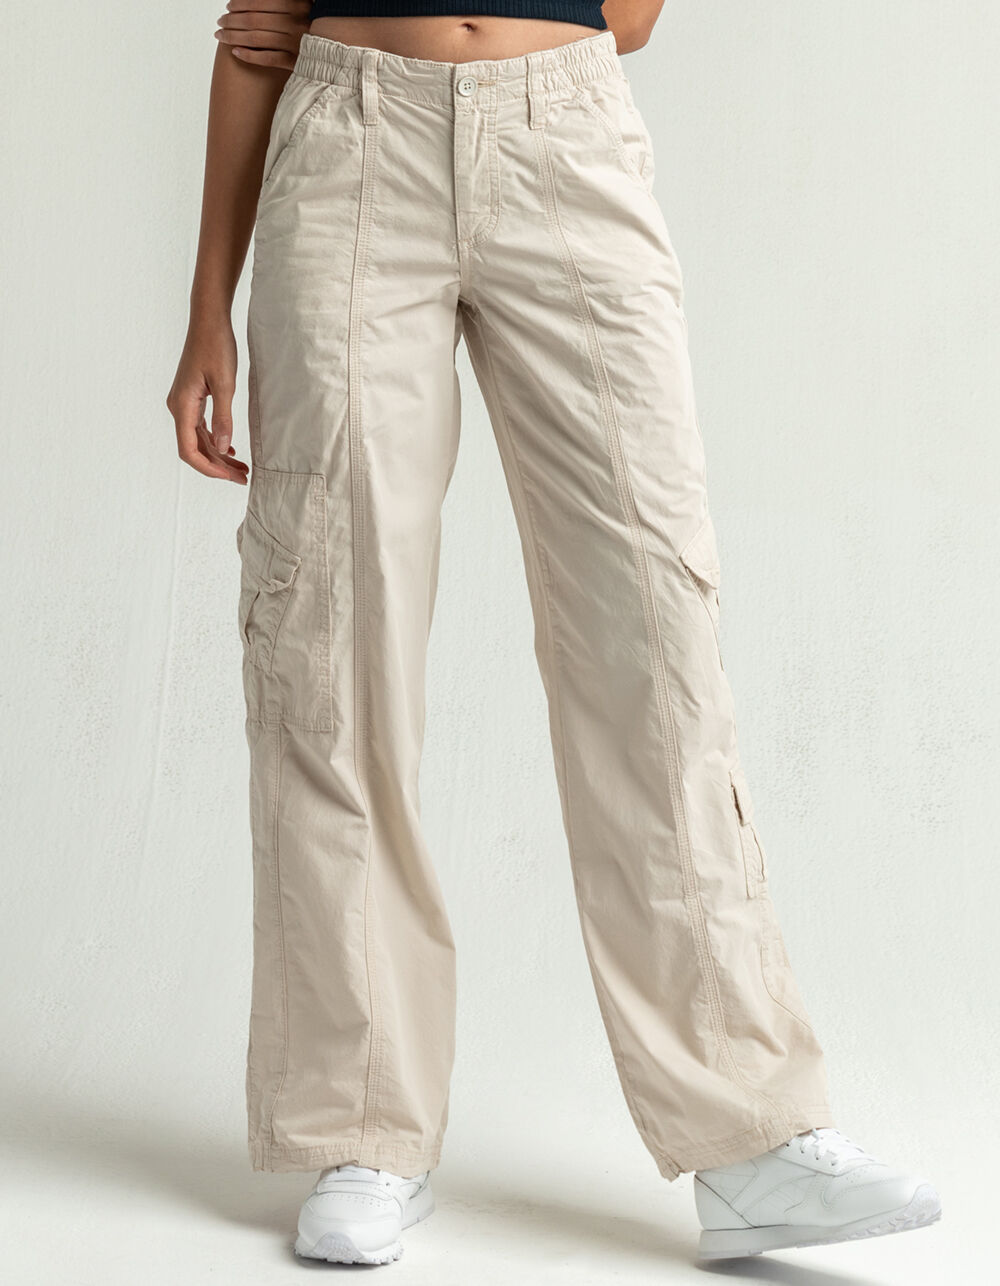 BDG Urban Outfitters 90s Womens Low Rise Cargo Jeans - STONE WASH | Tillys